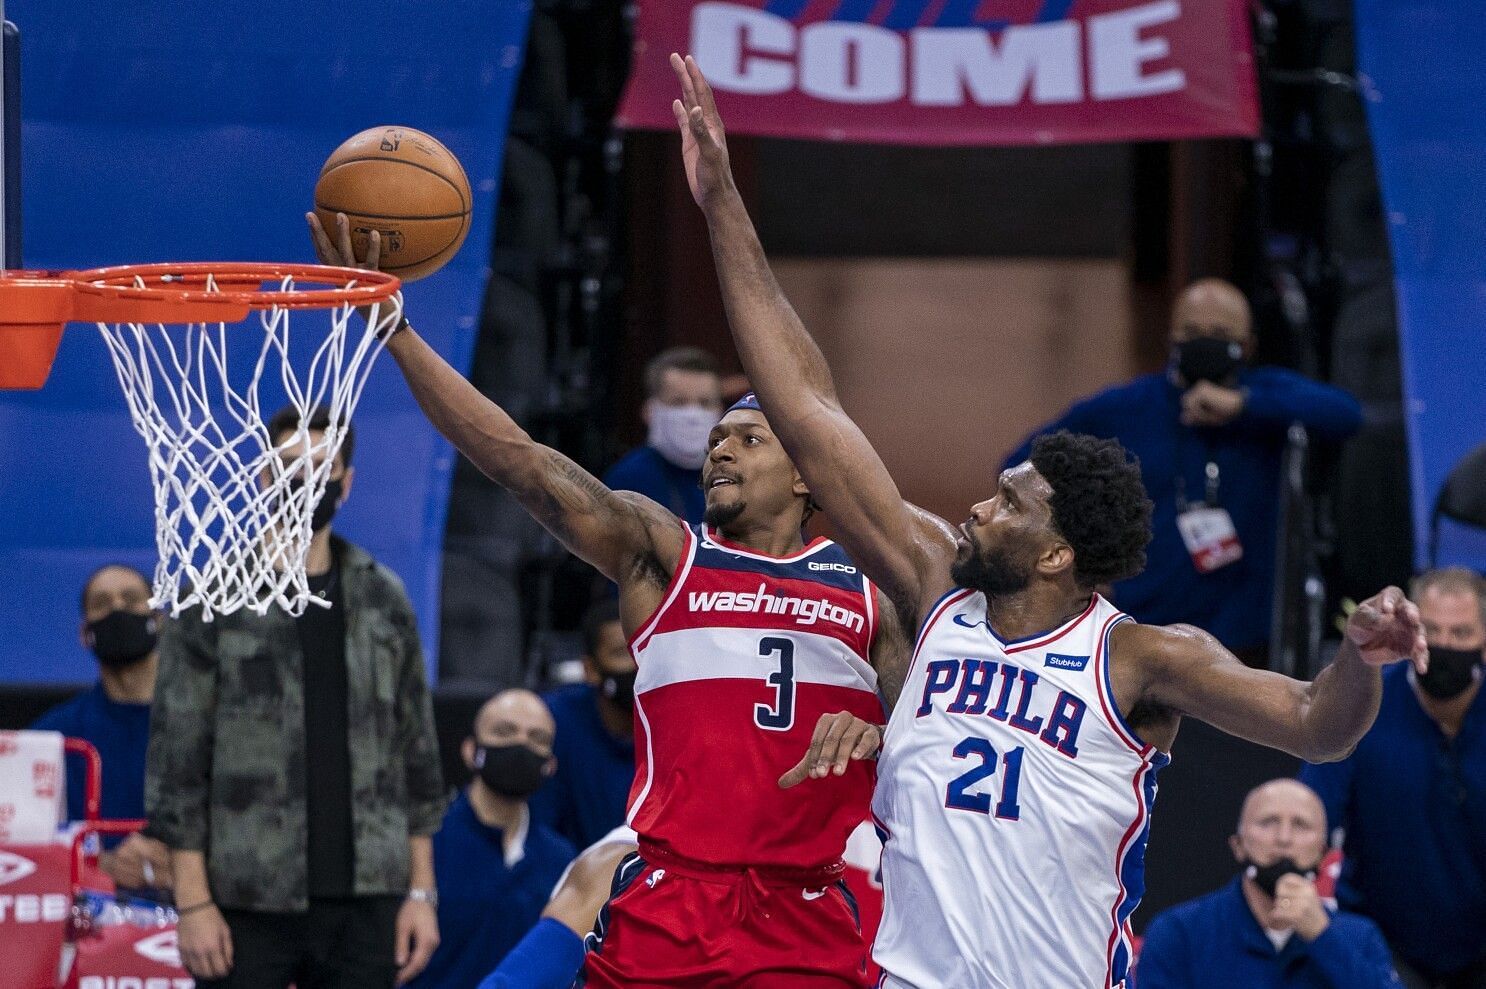 The visiting Philadelphia 76ers are hoping to stay unbeaten against the Washington Wizards this season on Monday. [Photo: Los Angeles Times]